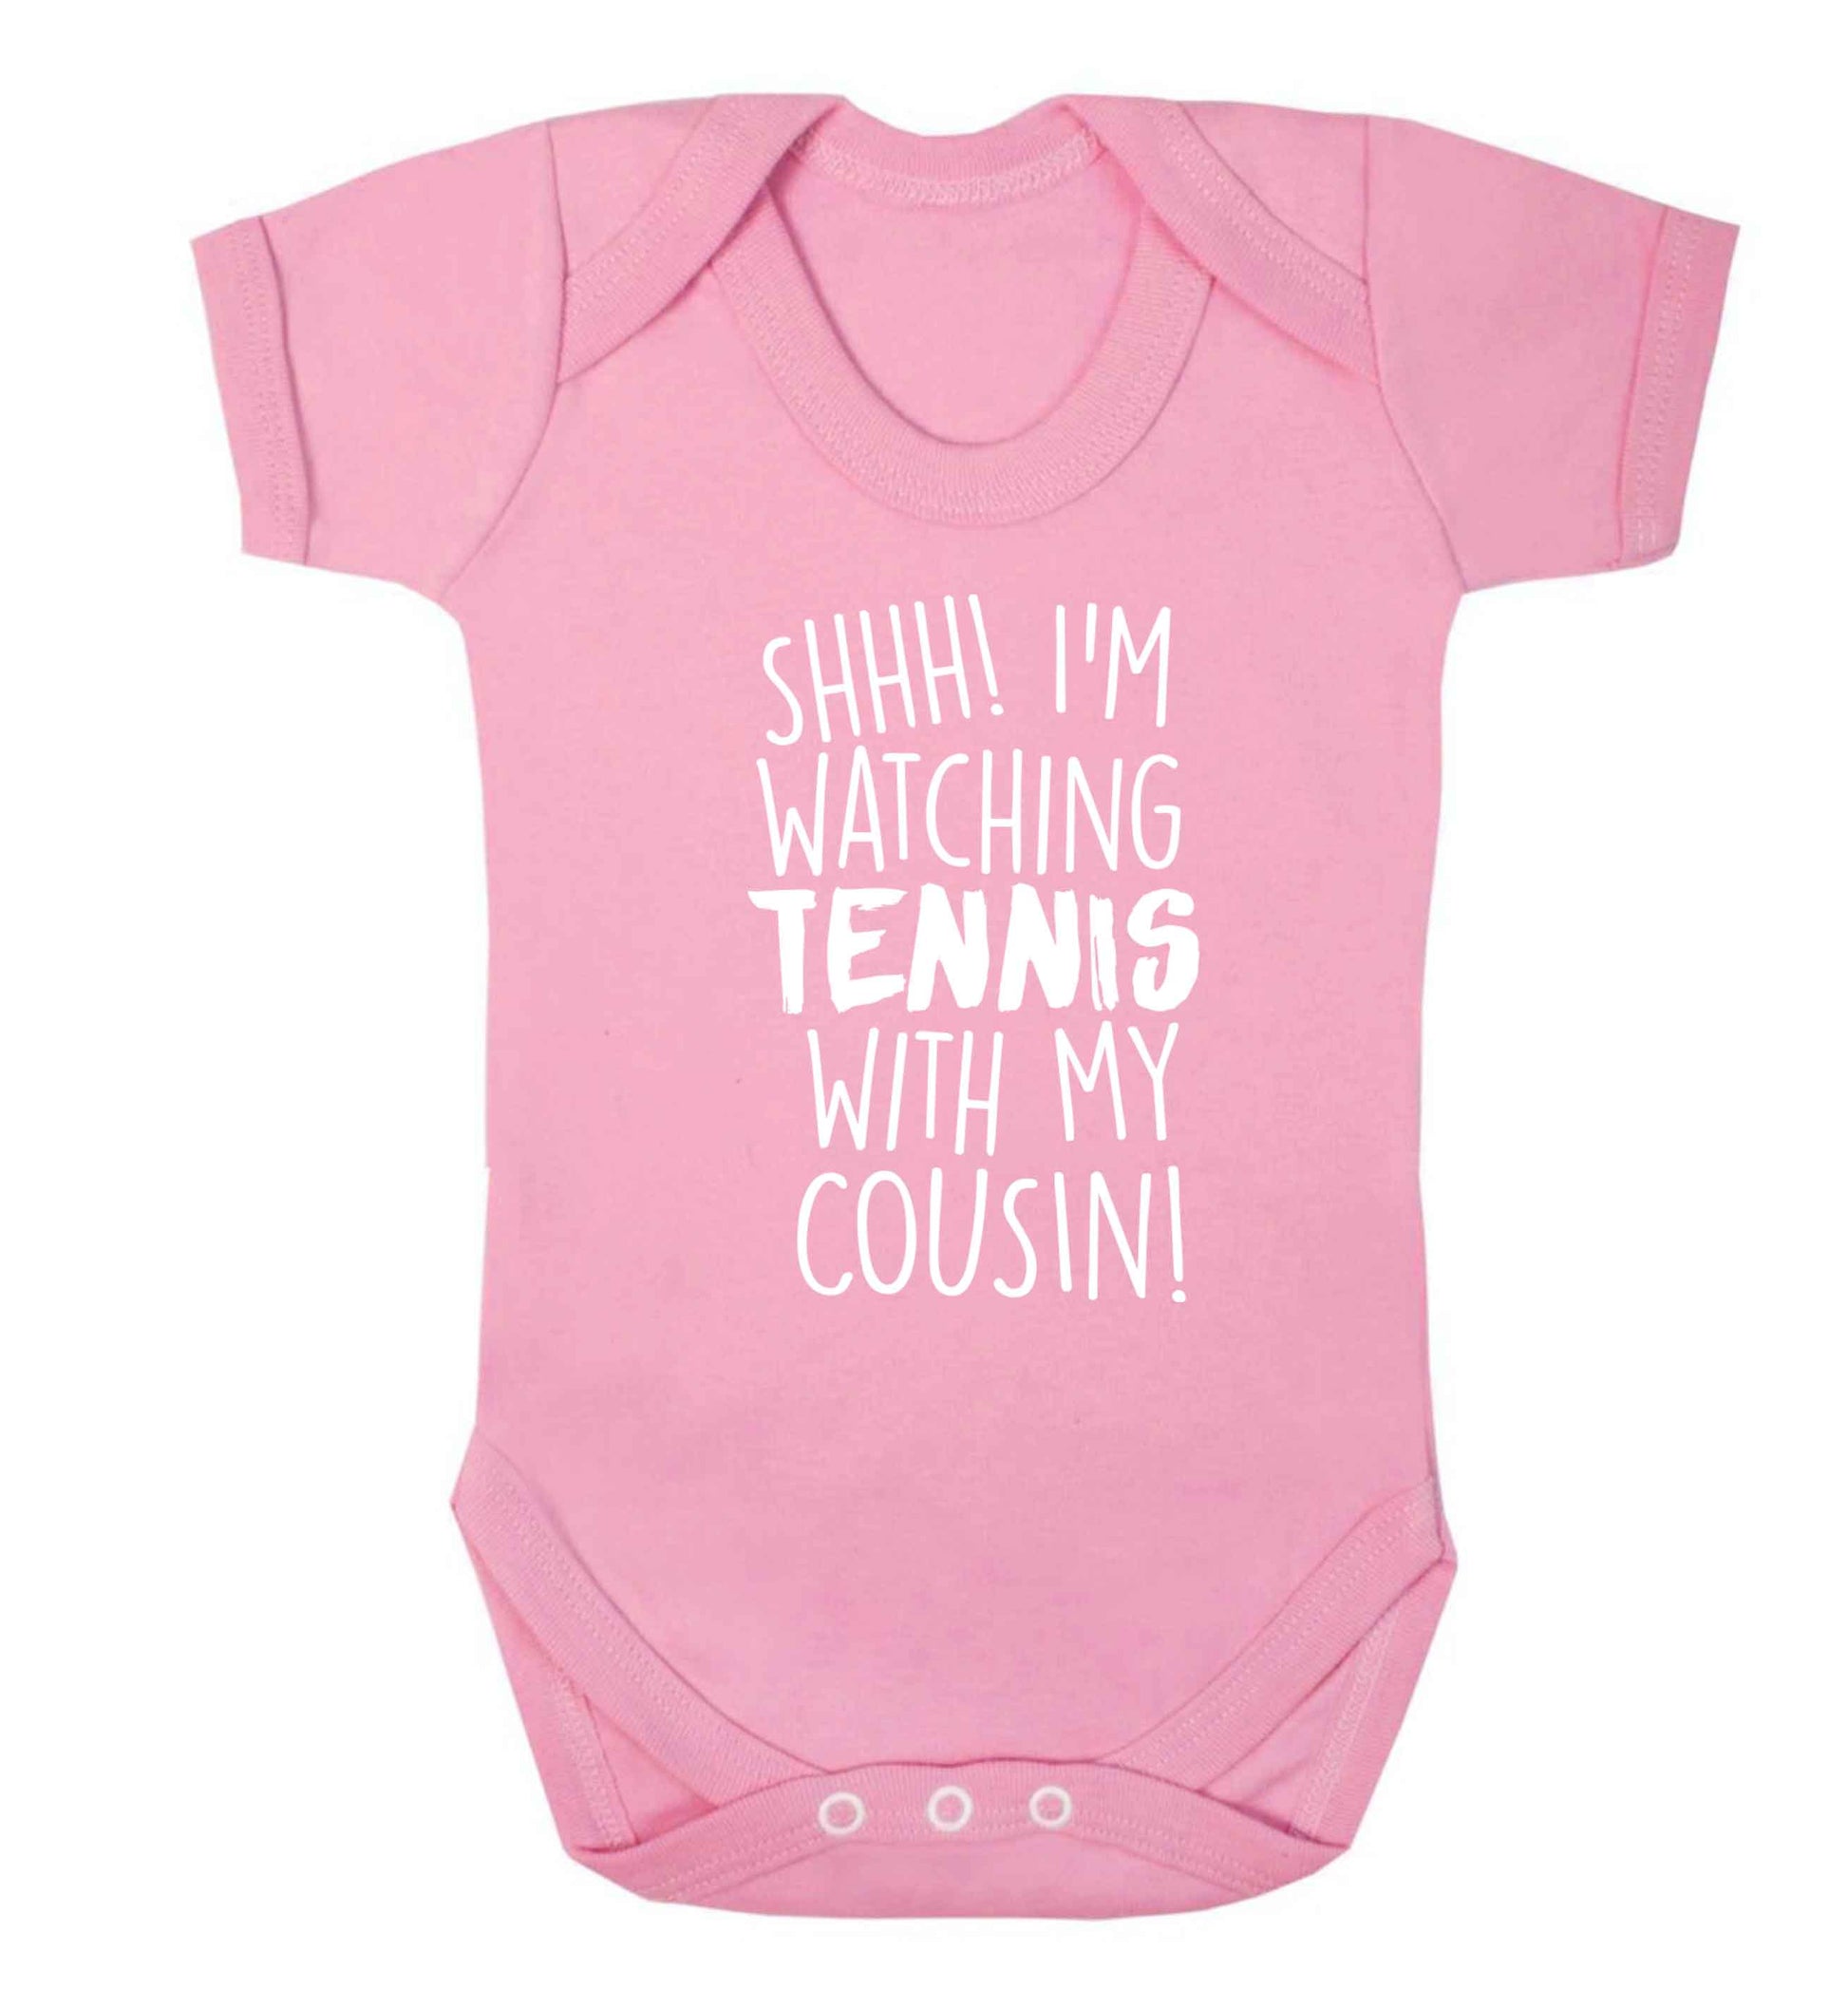 Shh! I'm watching tennis with my cousin! Baby Vest pale pink 18-24 months